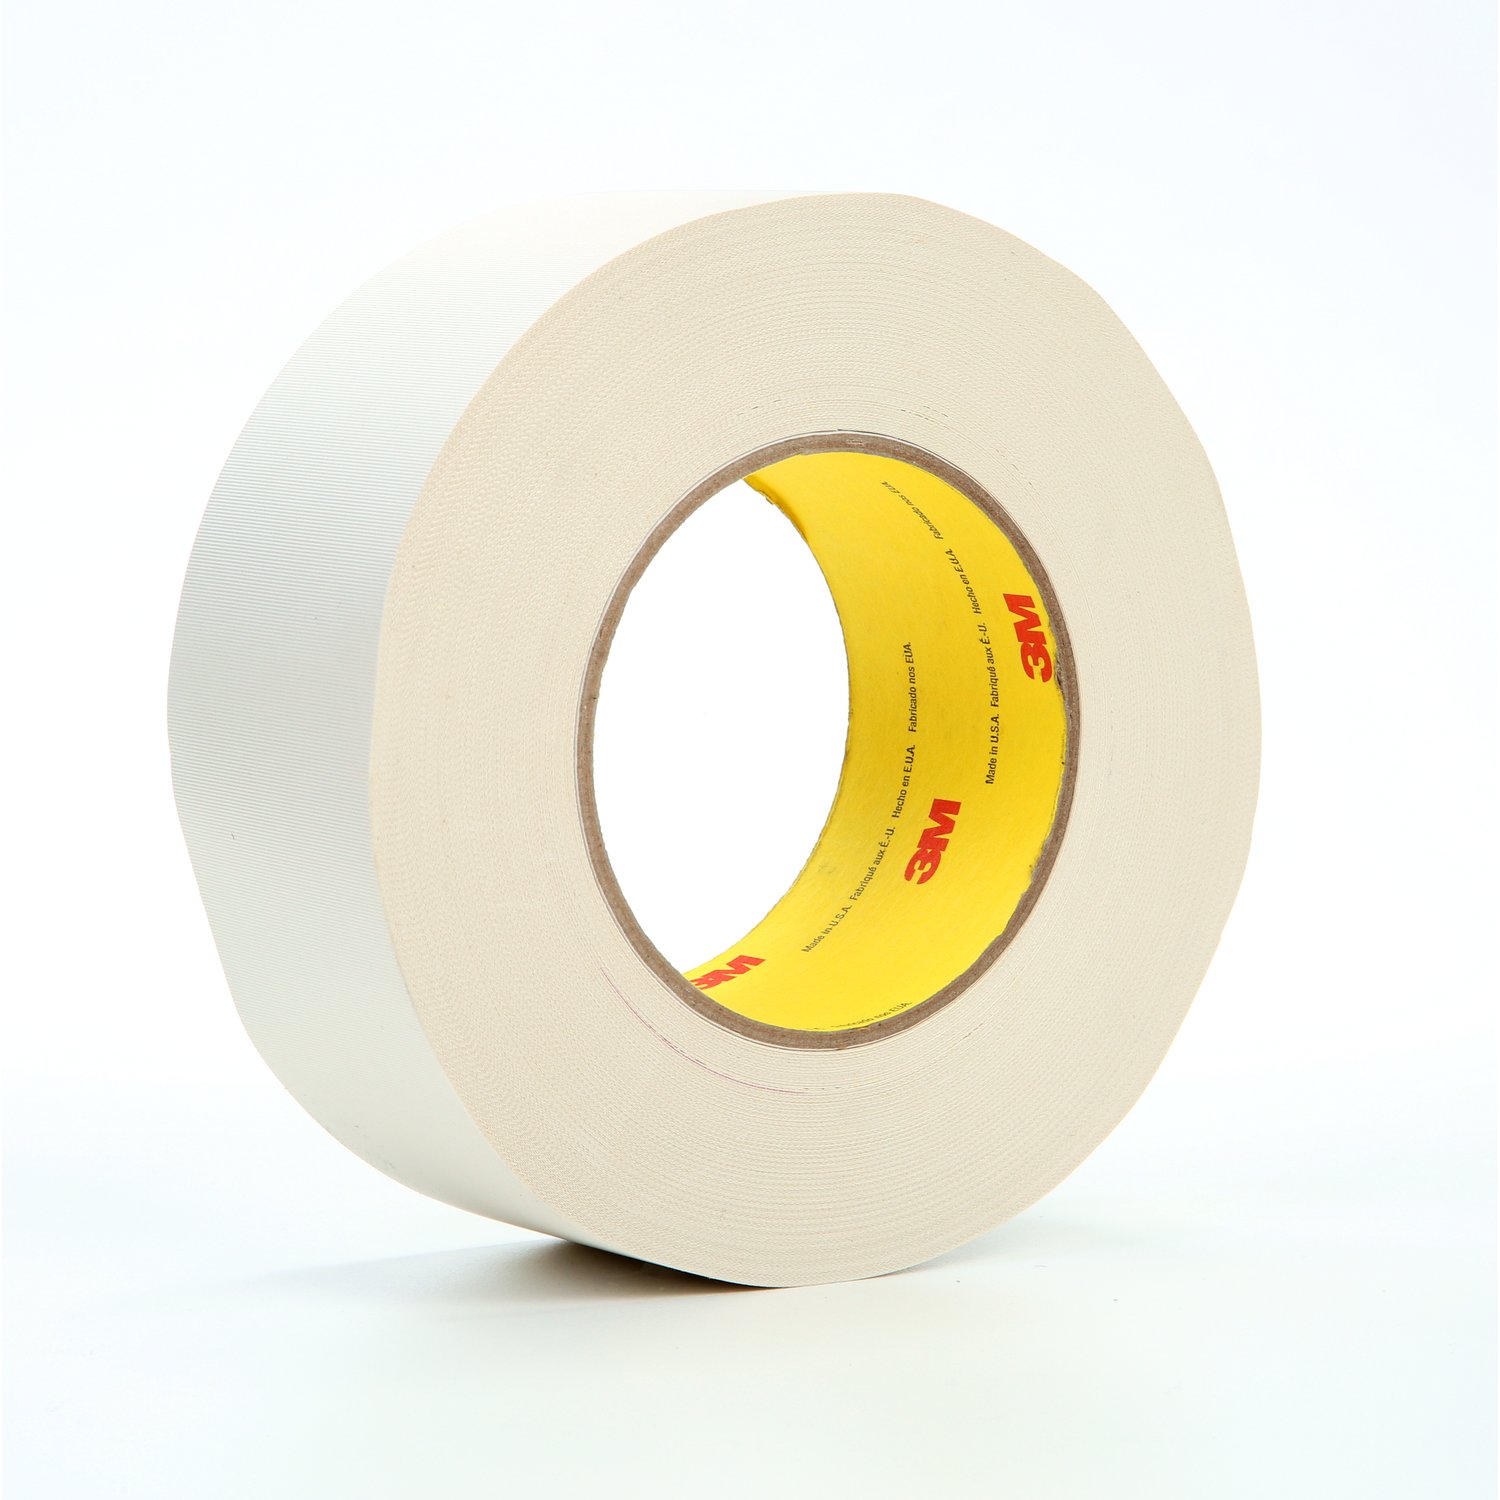 7000123432 - 3M Thermosetable Glass Cloth Tape 365, White, 2 in x 60 yd, 8.3 mil, 24
rolls per case